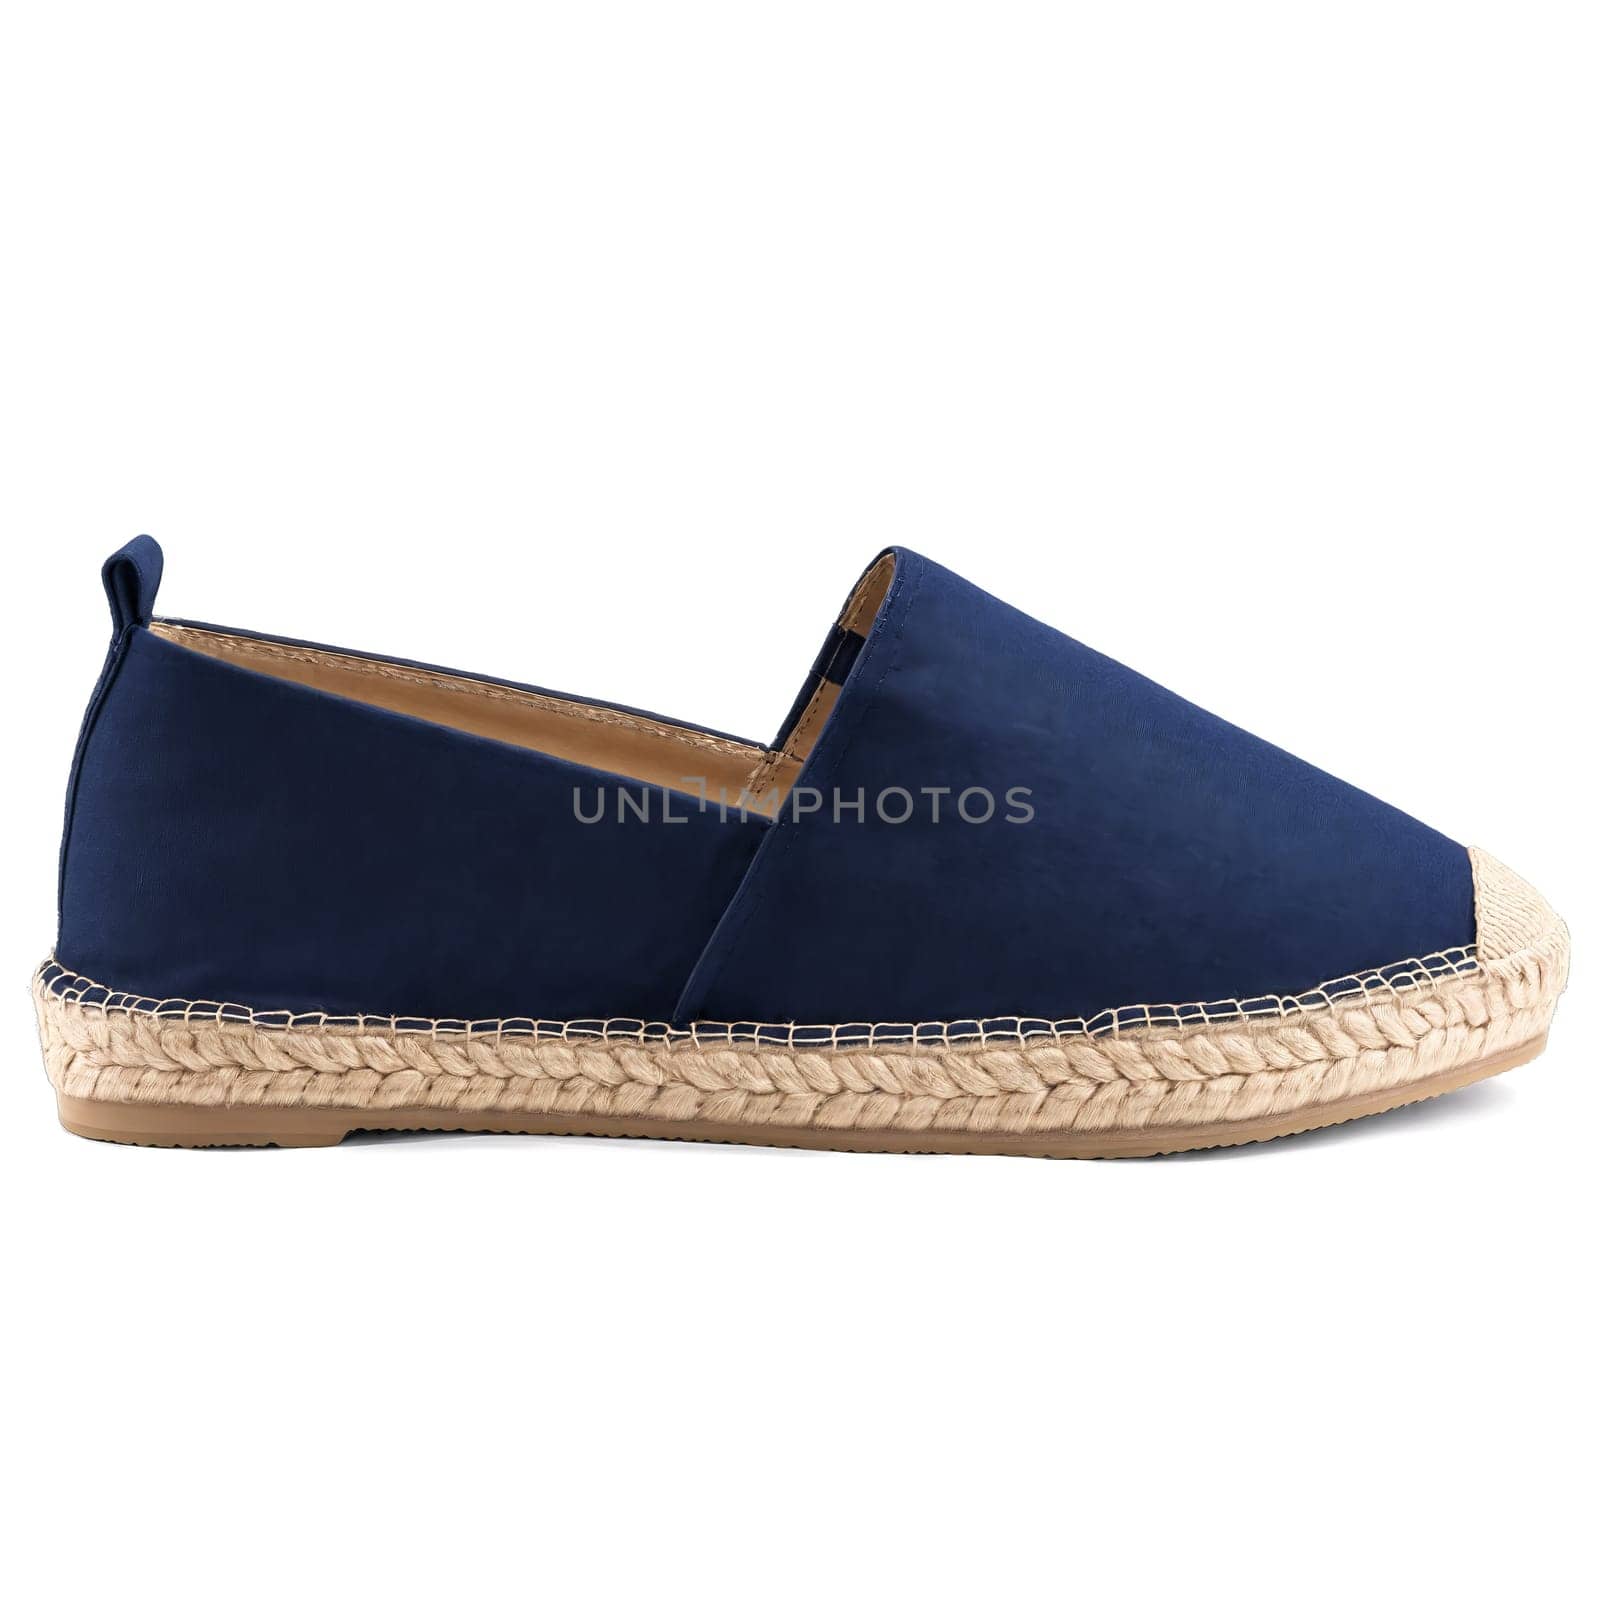 Casual navy blue espadrilles Relaxed navy blue canvas espadrilles with a 1 inch jute wrapped by panophotograph